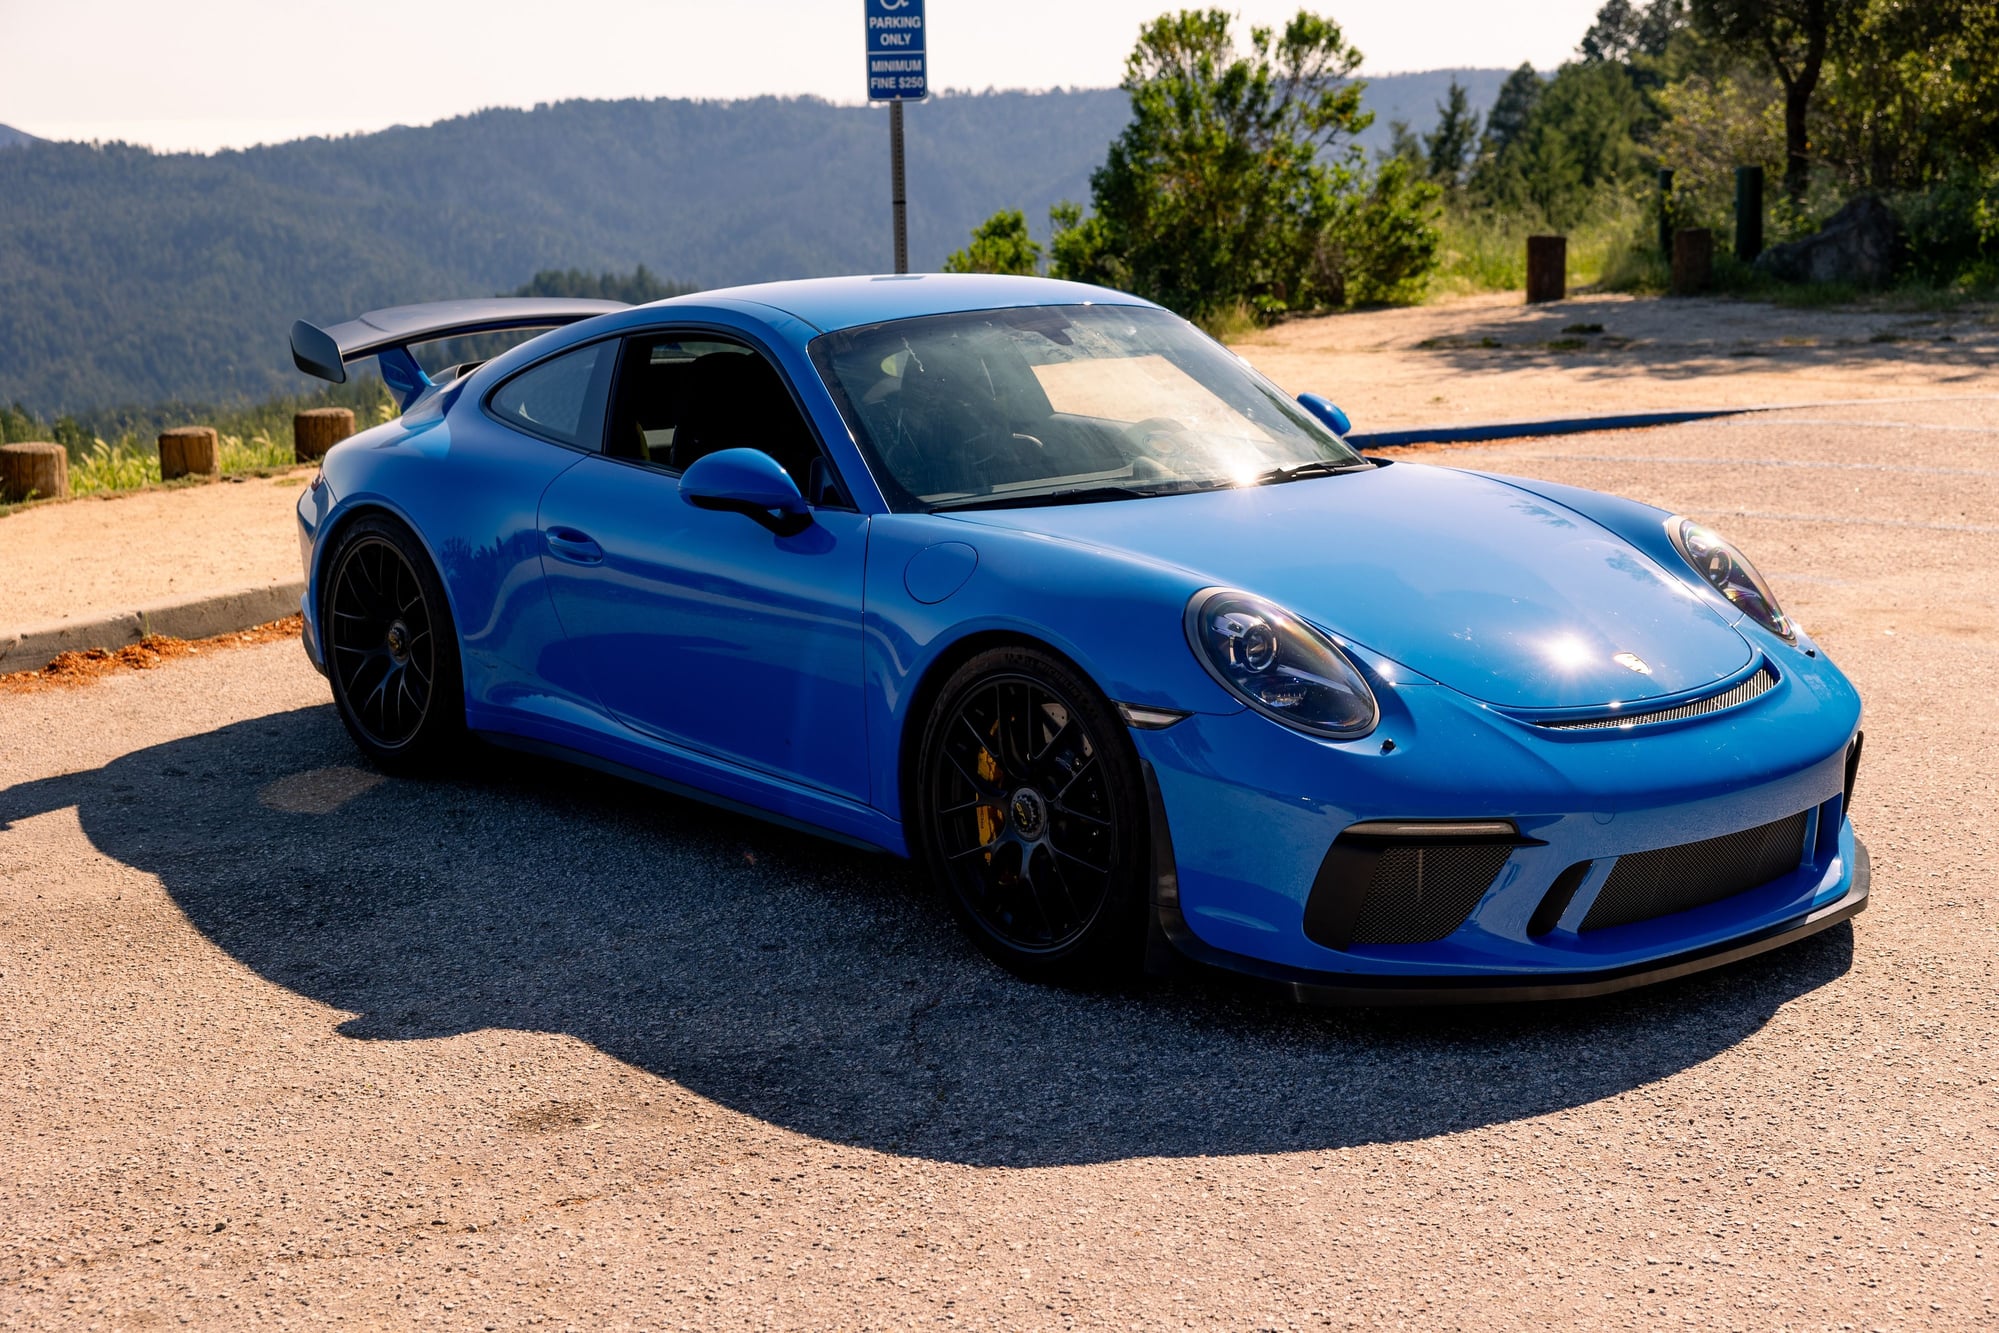 2018 Porsche GT3 - FS: 2018 911 GT3 (PTS: Voodoo Blue) 6MT - Used - VIN WP0AC2A92JS176140 - 3,744 Miles - 6 cyl - 2WD - Manual - Coupe - Blue - Redwood City, CA 94062, United States